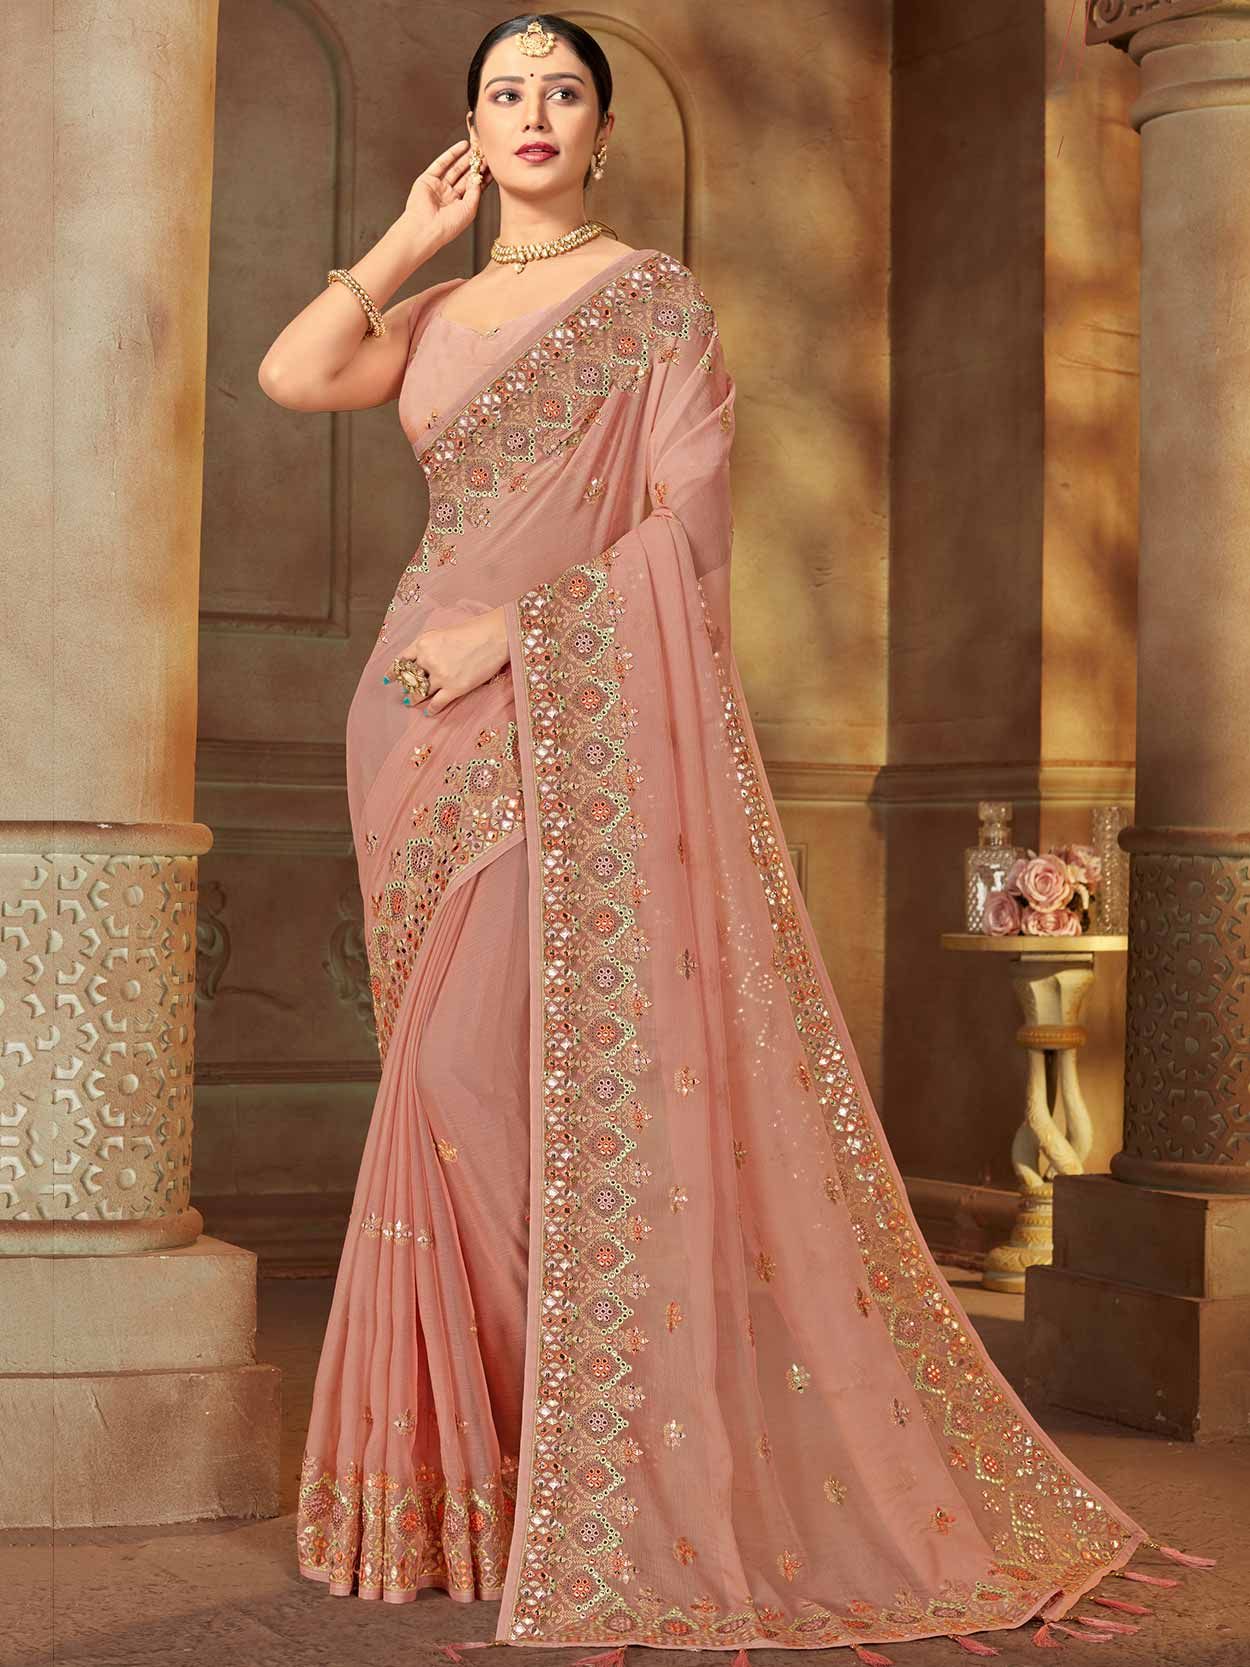 Highlight more than 213 chiffon sarees party wear latest